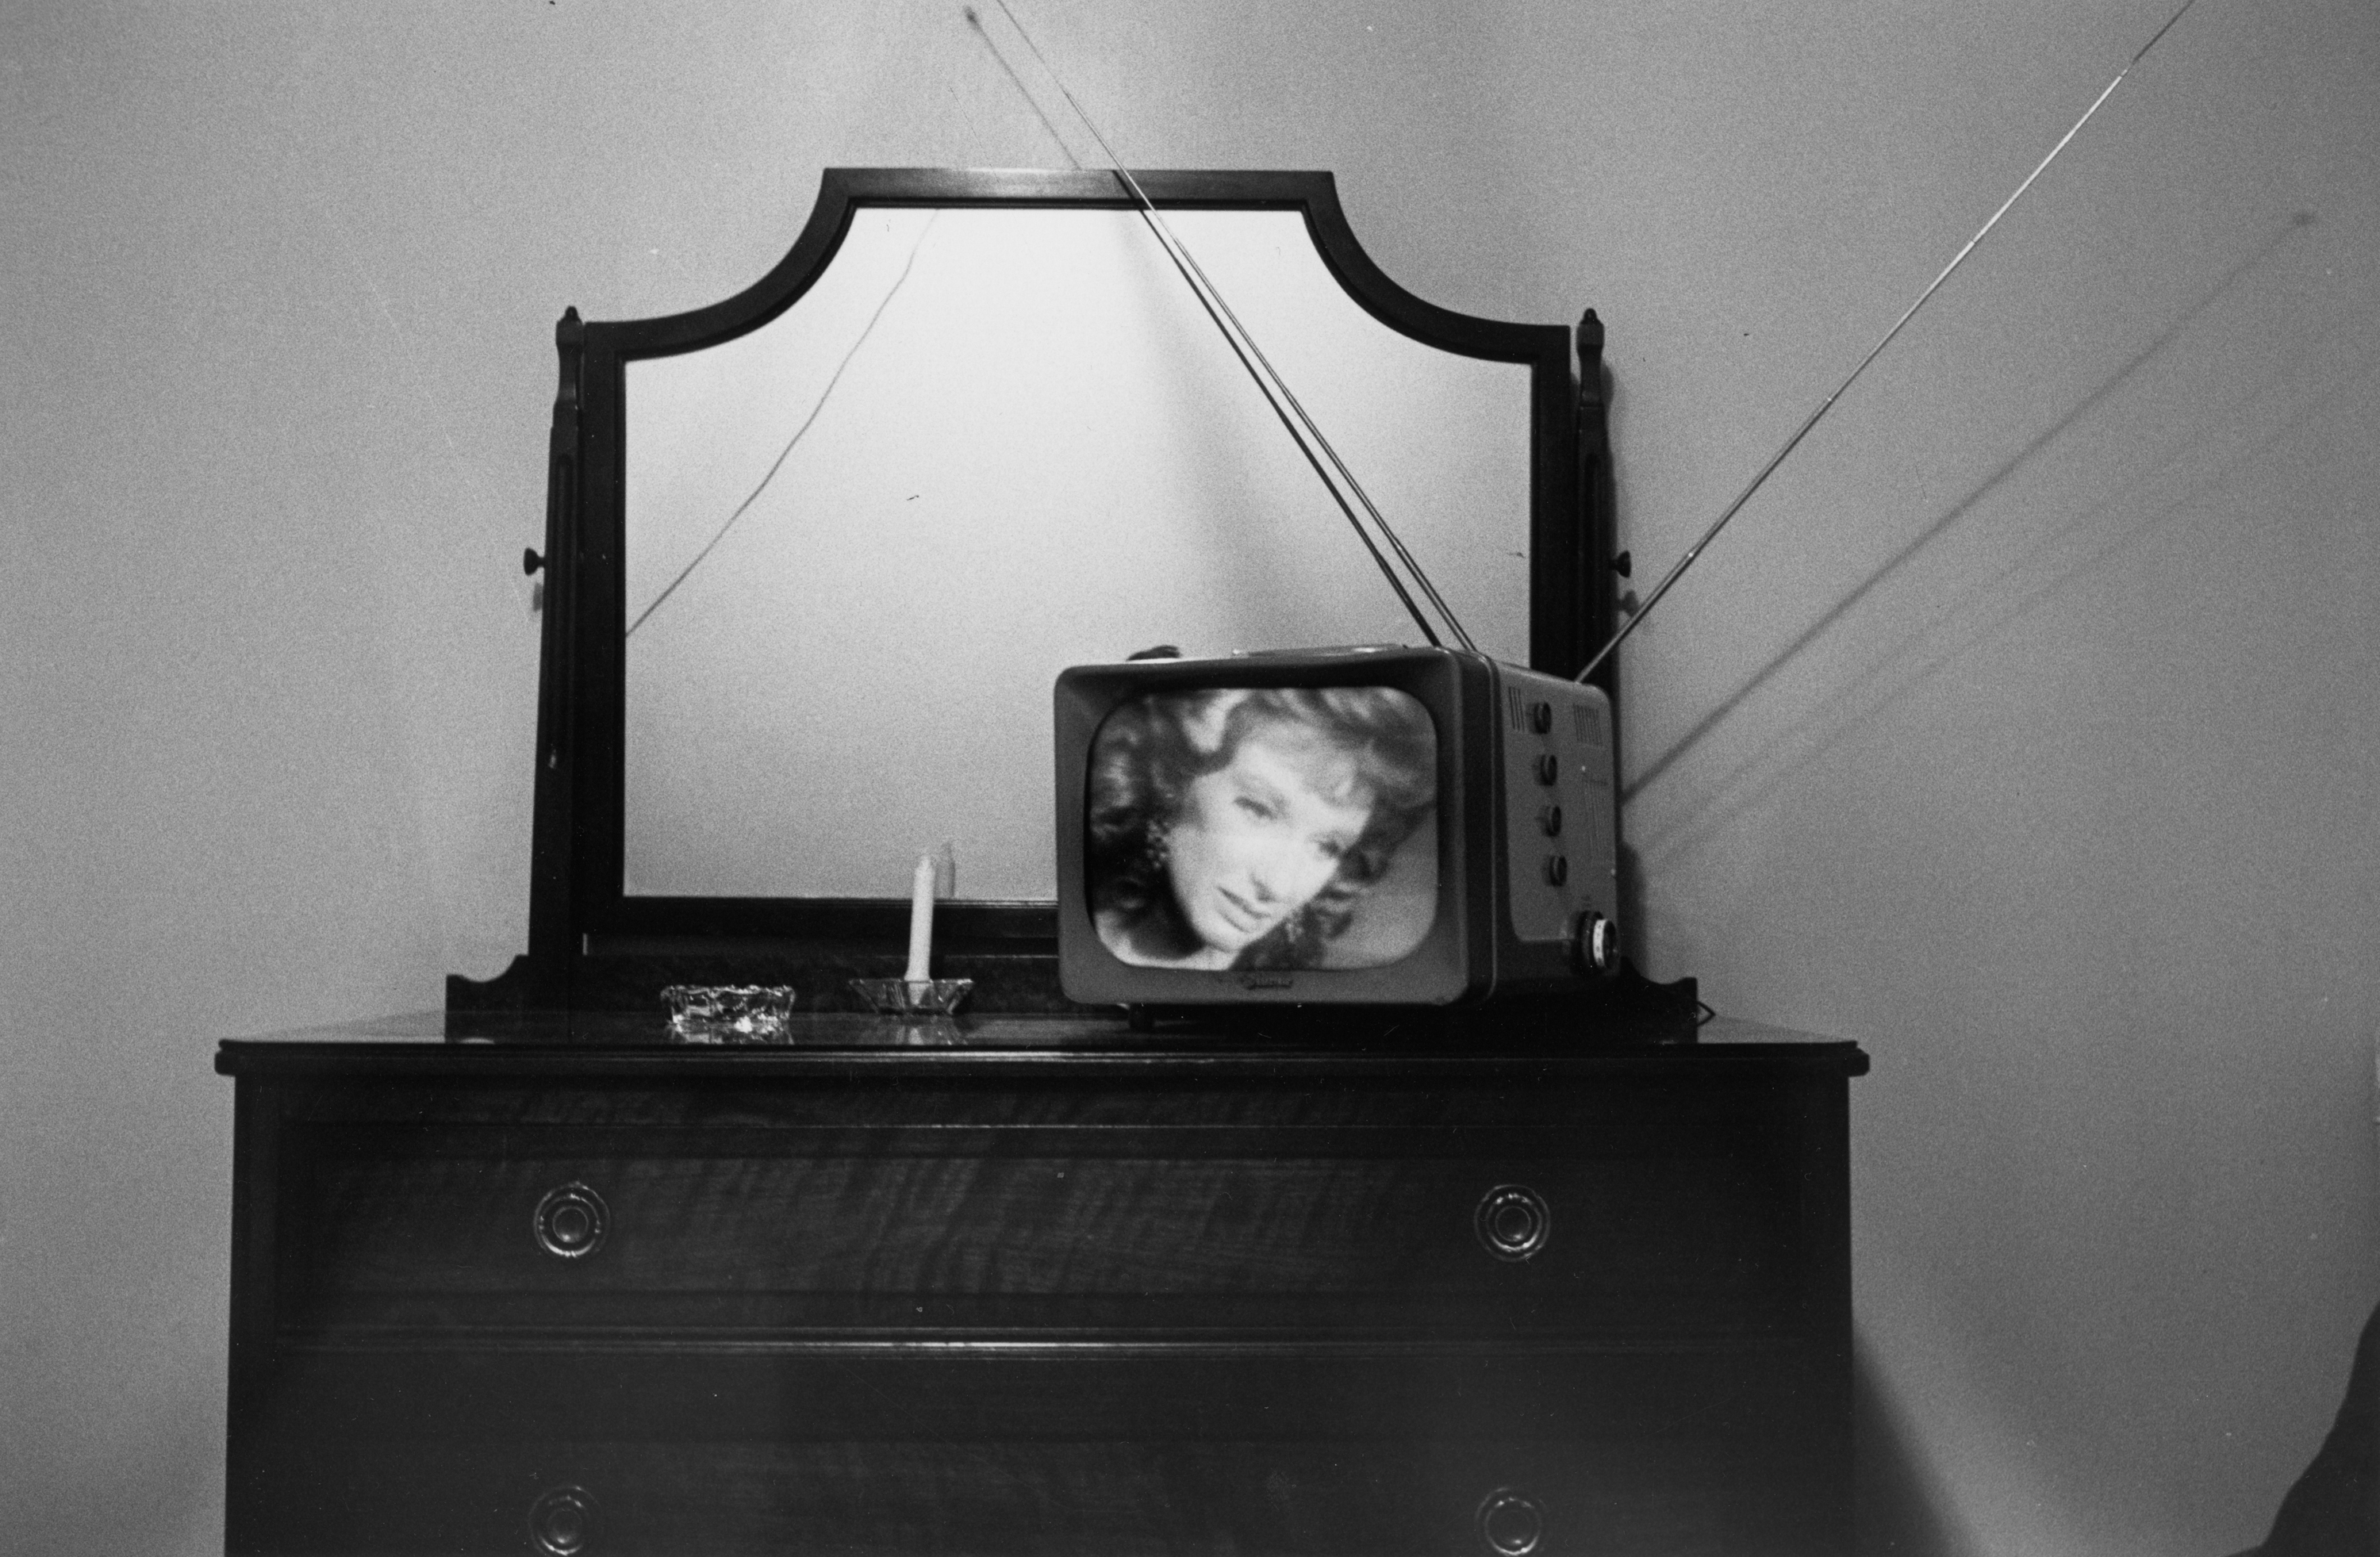 Black-and-white photograph of a television with a woman's face onscreen on top of a bureau